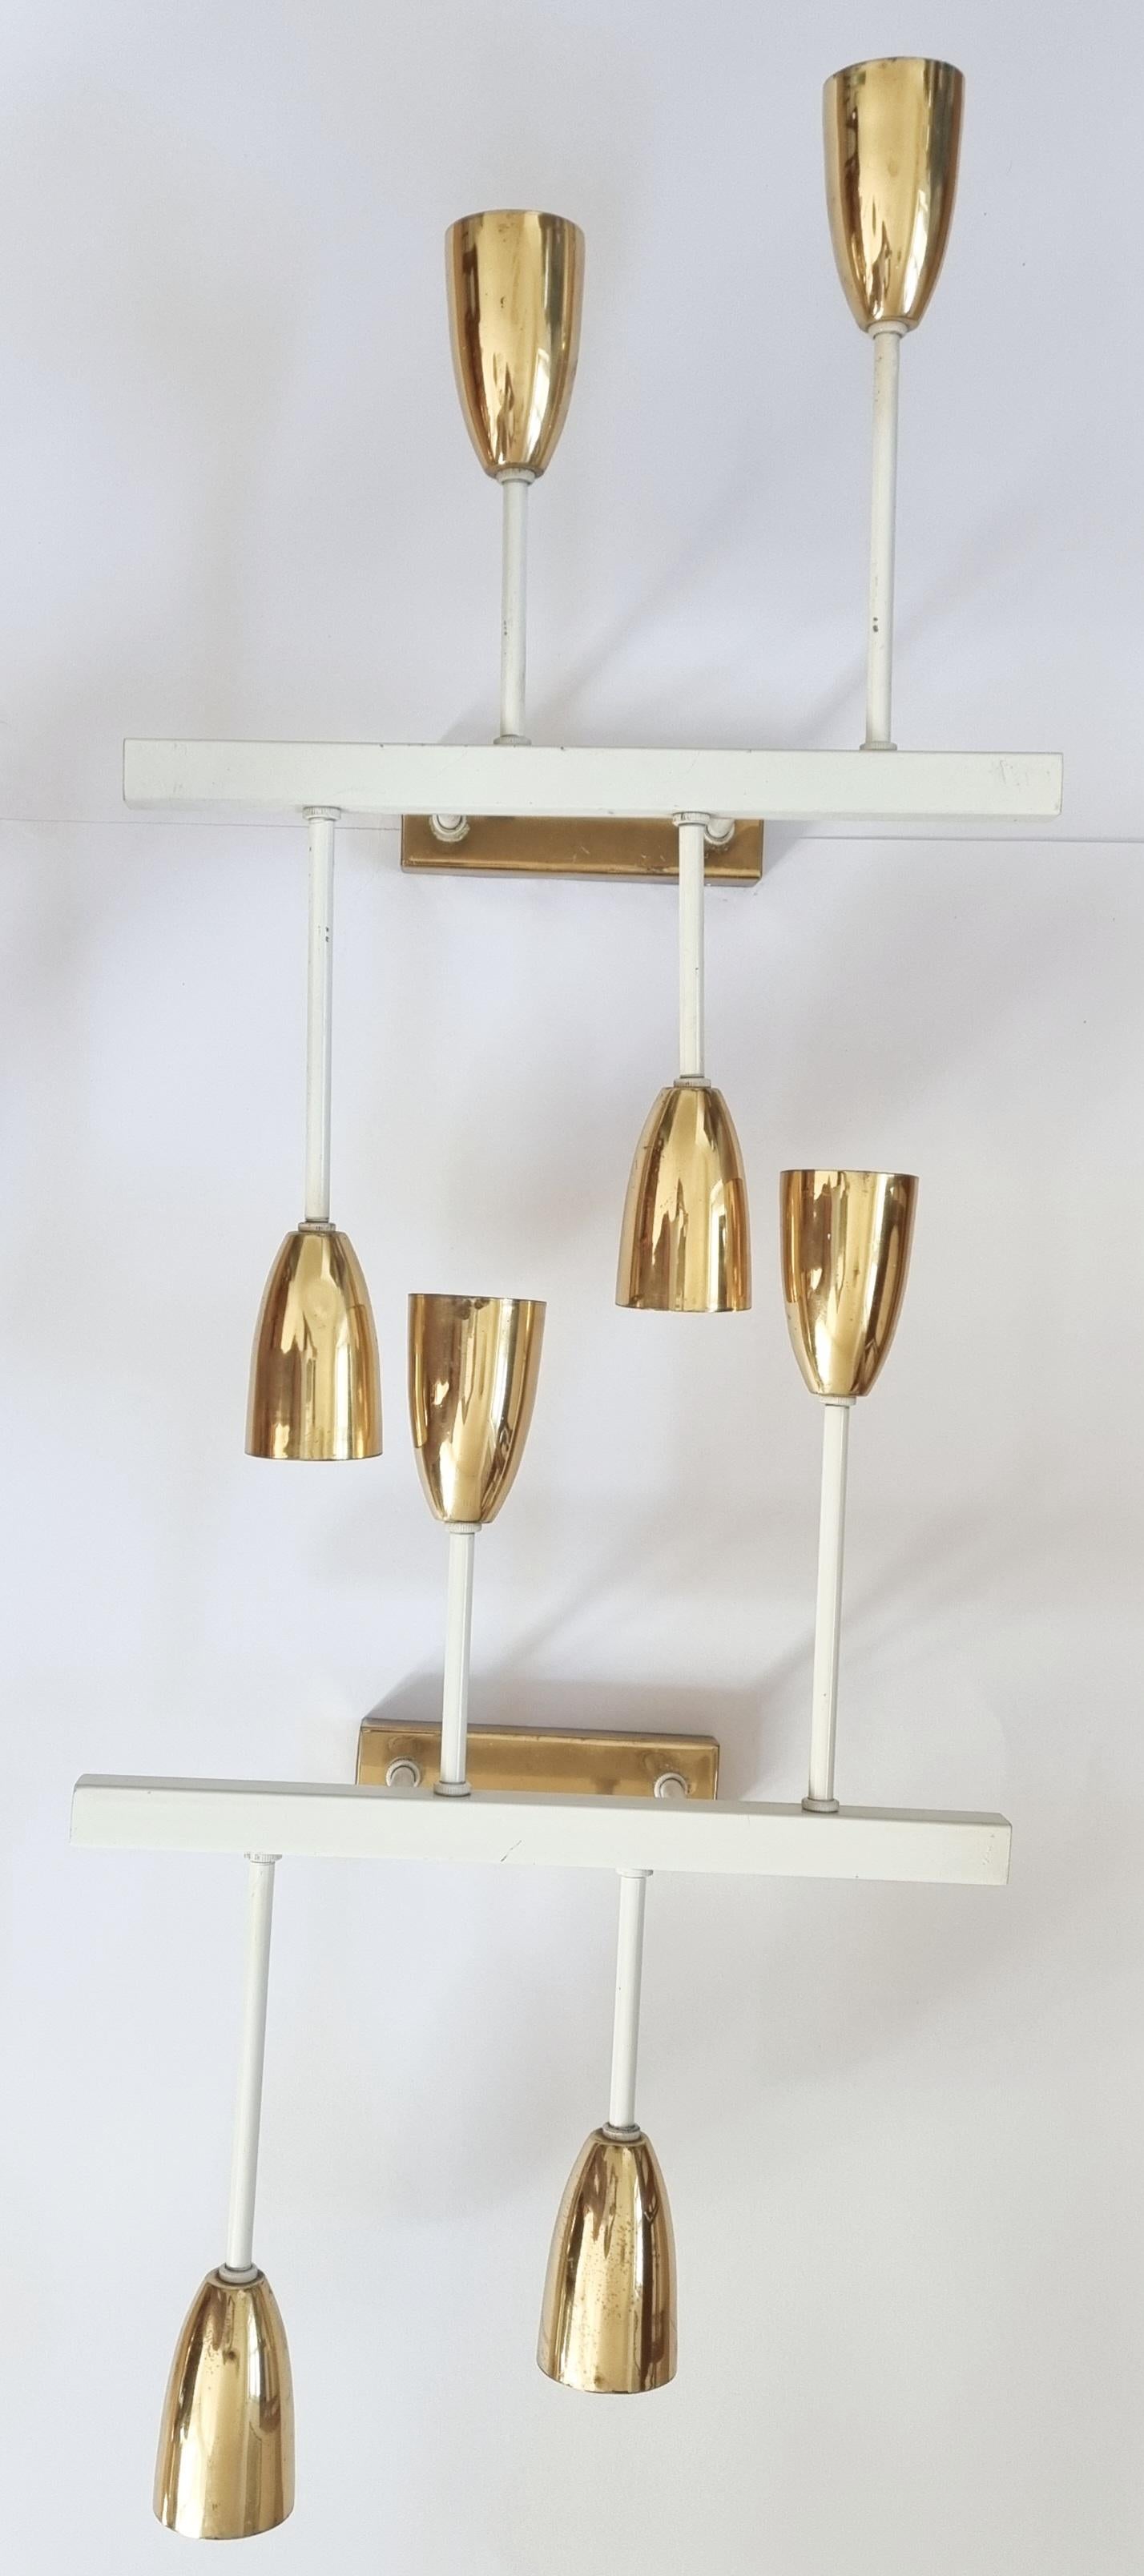 Pair of Midcentury Wall or Ceiling Lamps, Flush Mounts, Stilnovo Style, 1960s For Sale 11